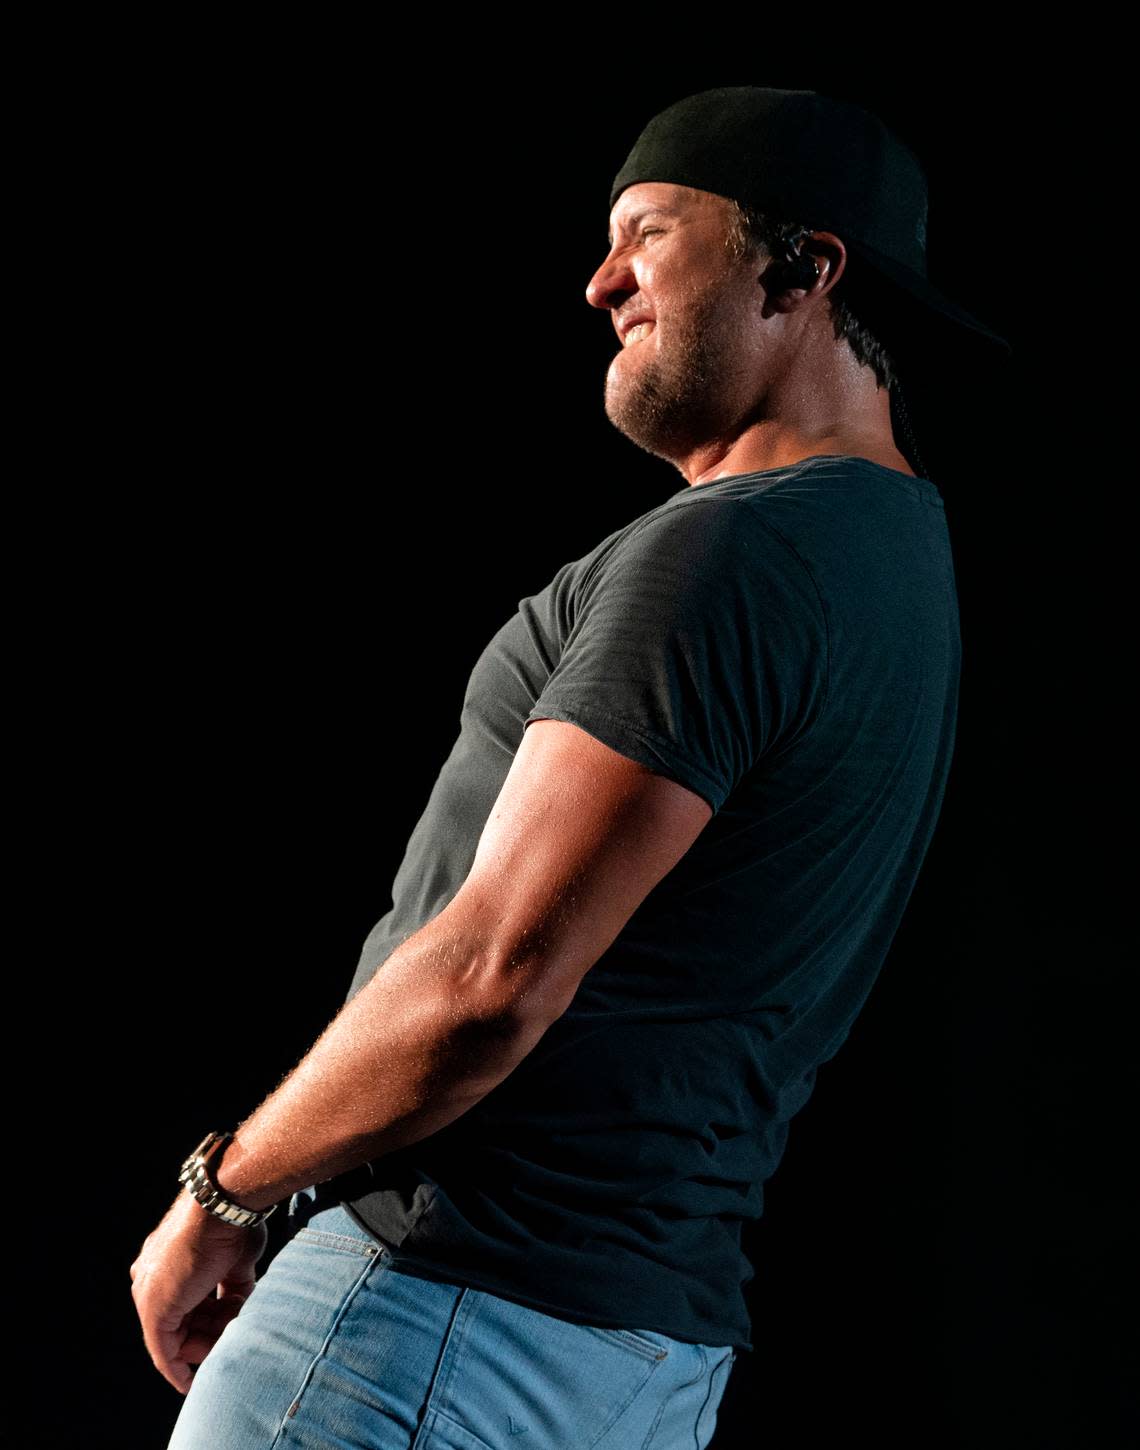 Luke Bryan brings his “Raised Up Right Tour” to the Coastal Credit Union Music Pavilion at Walnut Creek in Raleigh, N.C., Friday night, July 8, 2022.